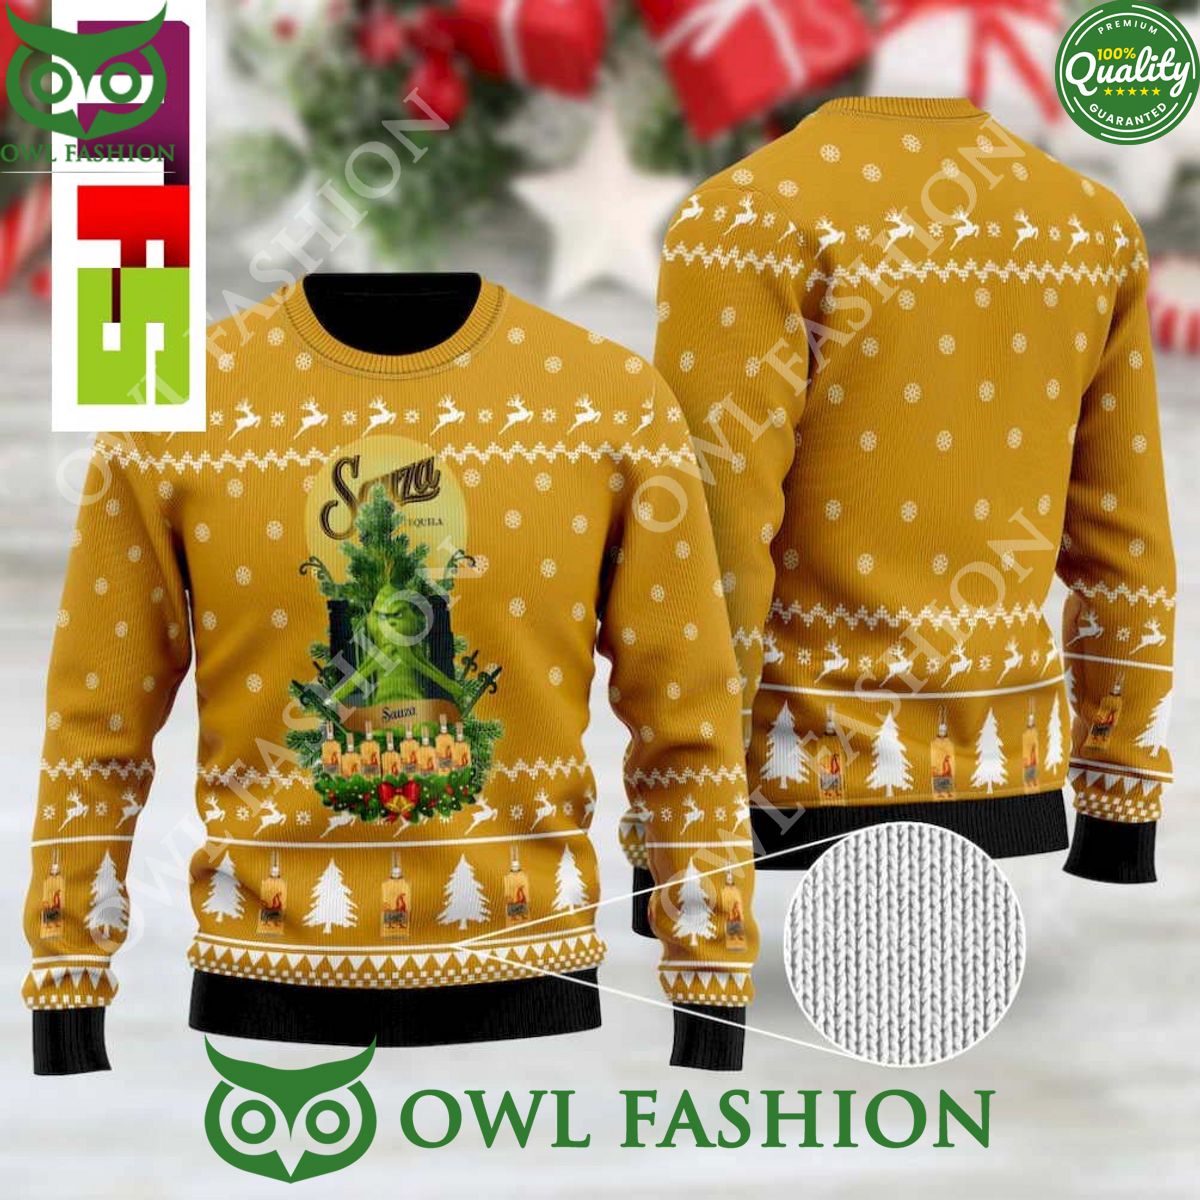 Sauza Tequila Vintage Grinch Ugly Christmas Sweater 2023